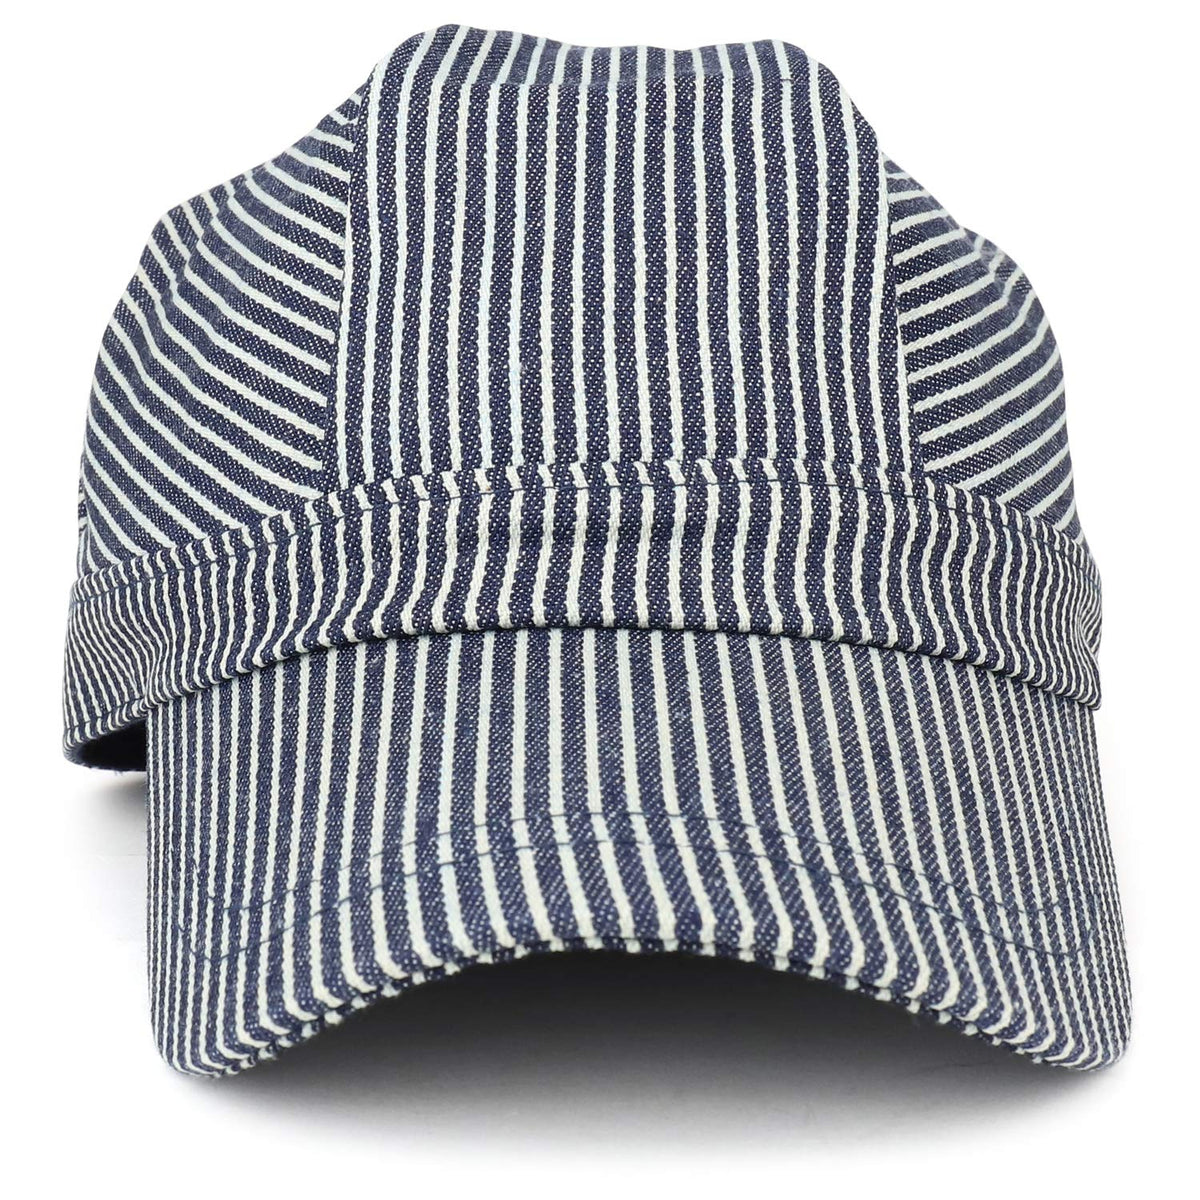 Armycrew Kid's Youth Size Hickory Stripe Railroad Train Engineer Cap